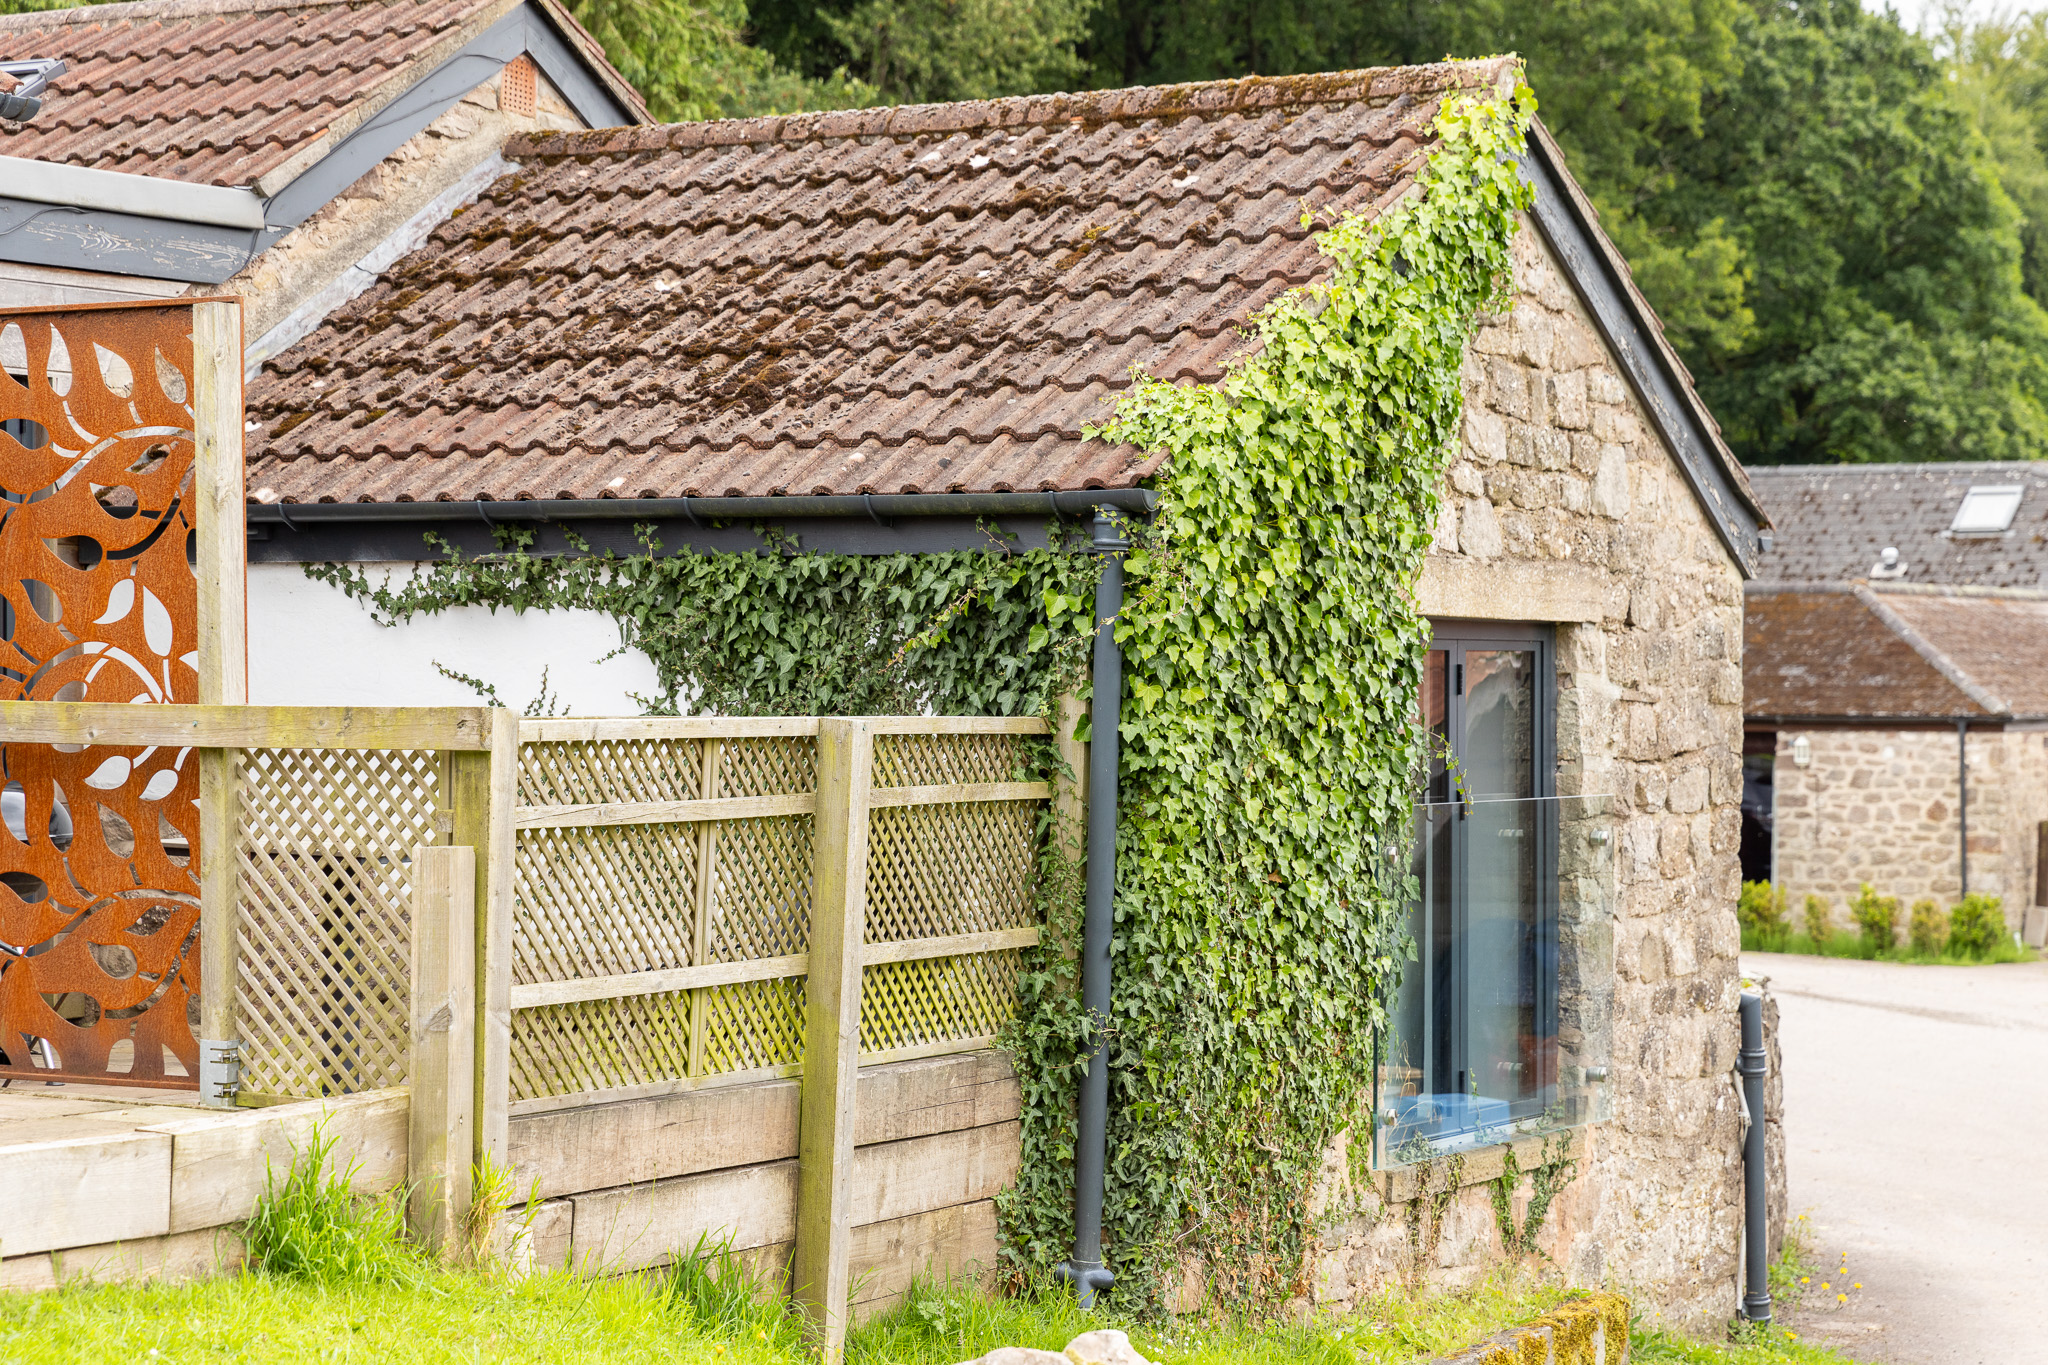 The rustic ivy-covered exterior of the Blorenge cottage